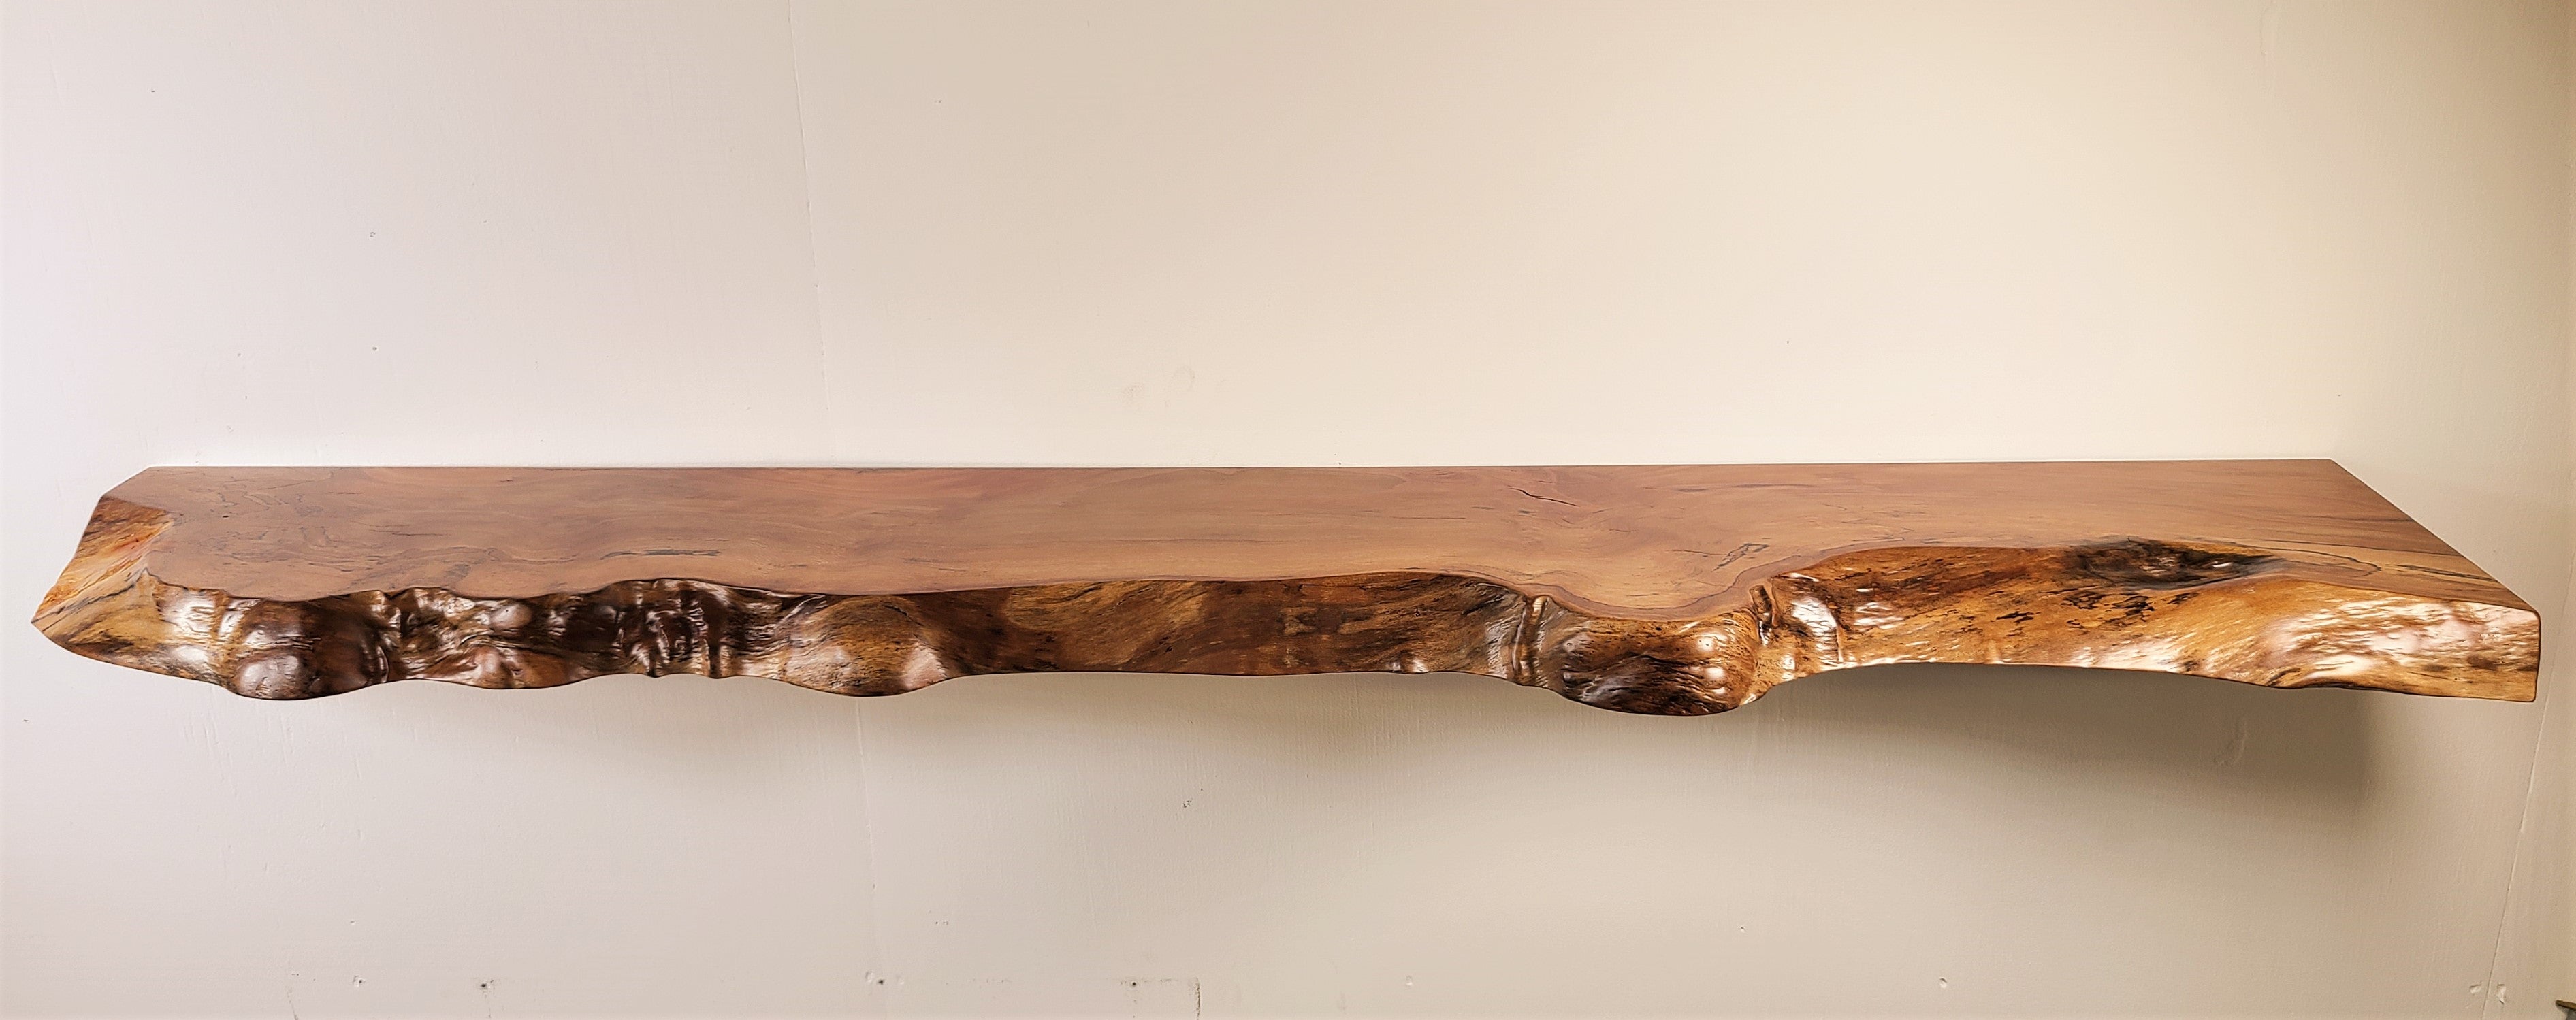 SYCAMORE LIVE-EDGE FLOATING SHELVES  /  BRACKET INCLUDED